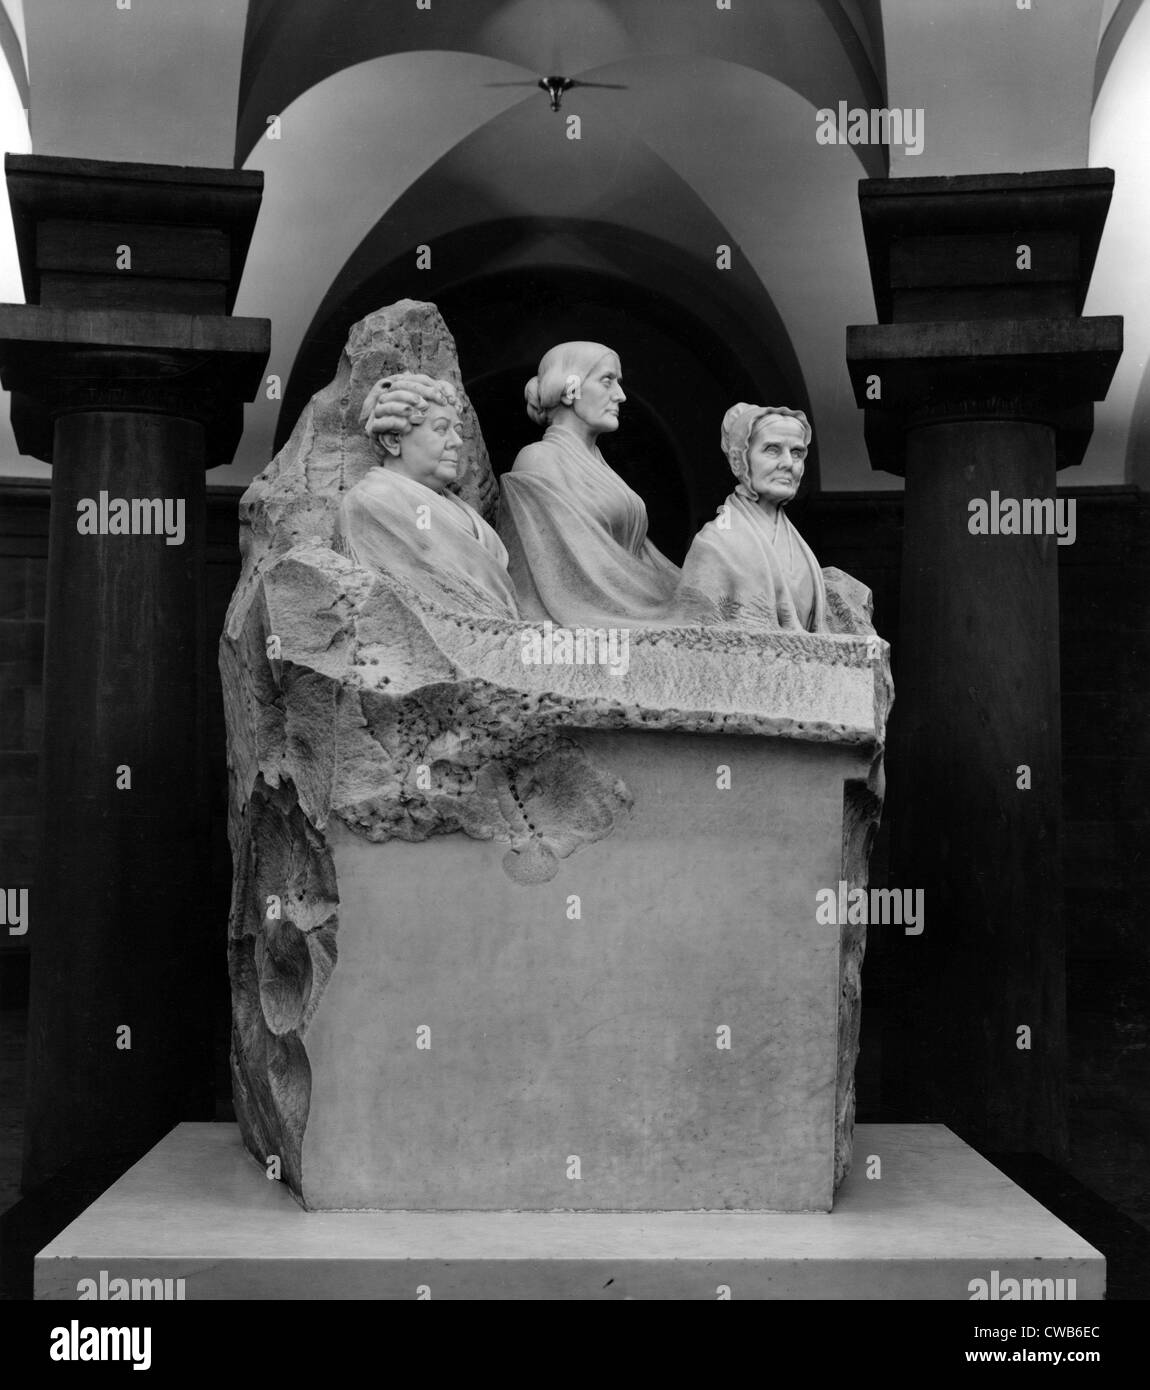 Portrait Monument to Lucretia Mott, Elizabeth Cady Stanton, and Susan B. Anthony, marble sculpture by Adelaide Johnson, 1920 Stock Photo